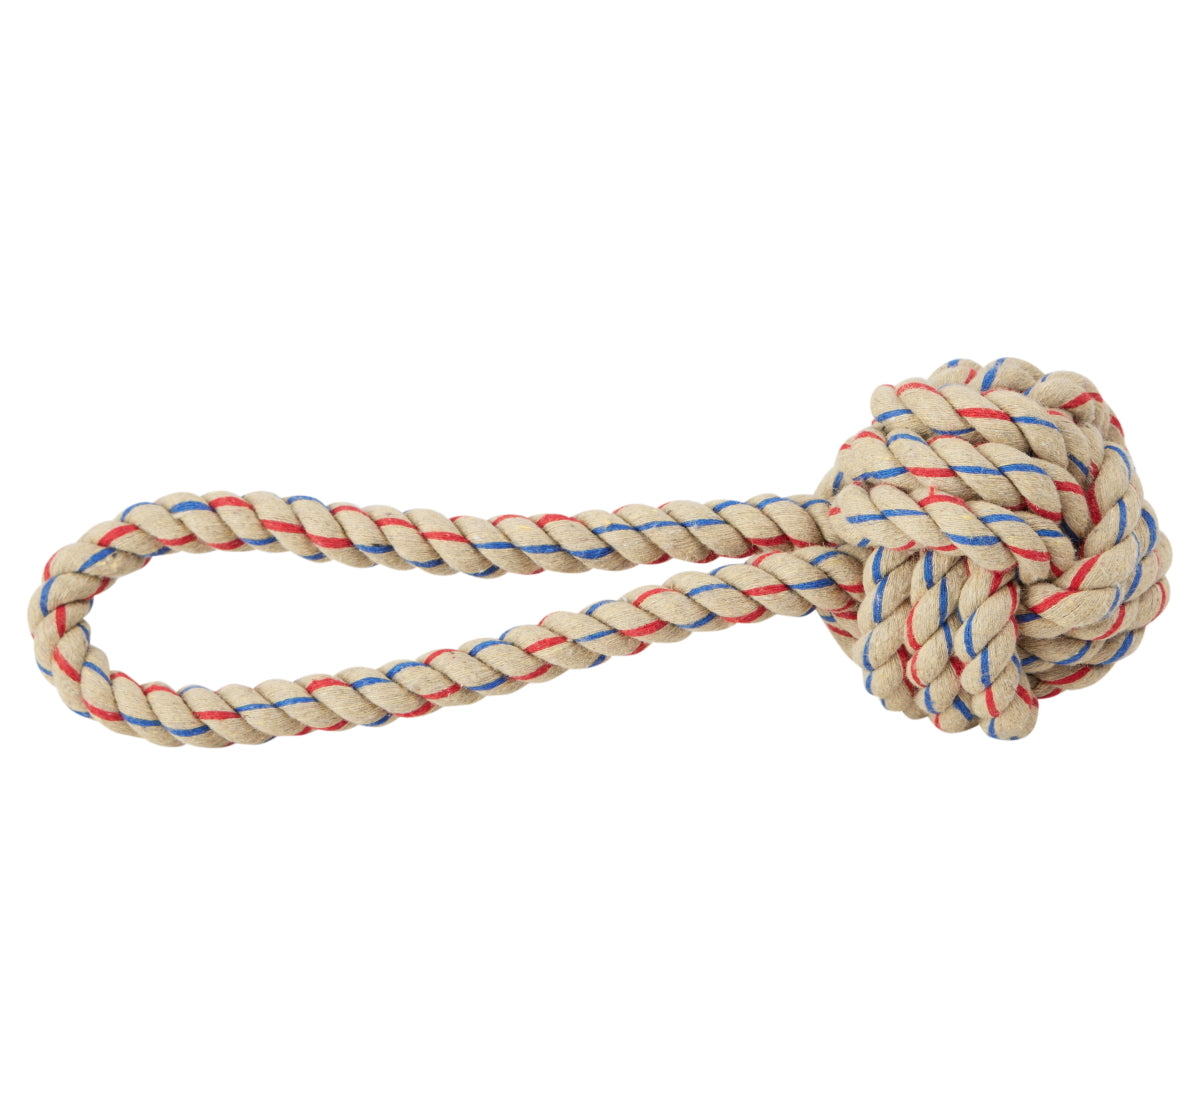 Otto Rope Dog Toy